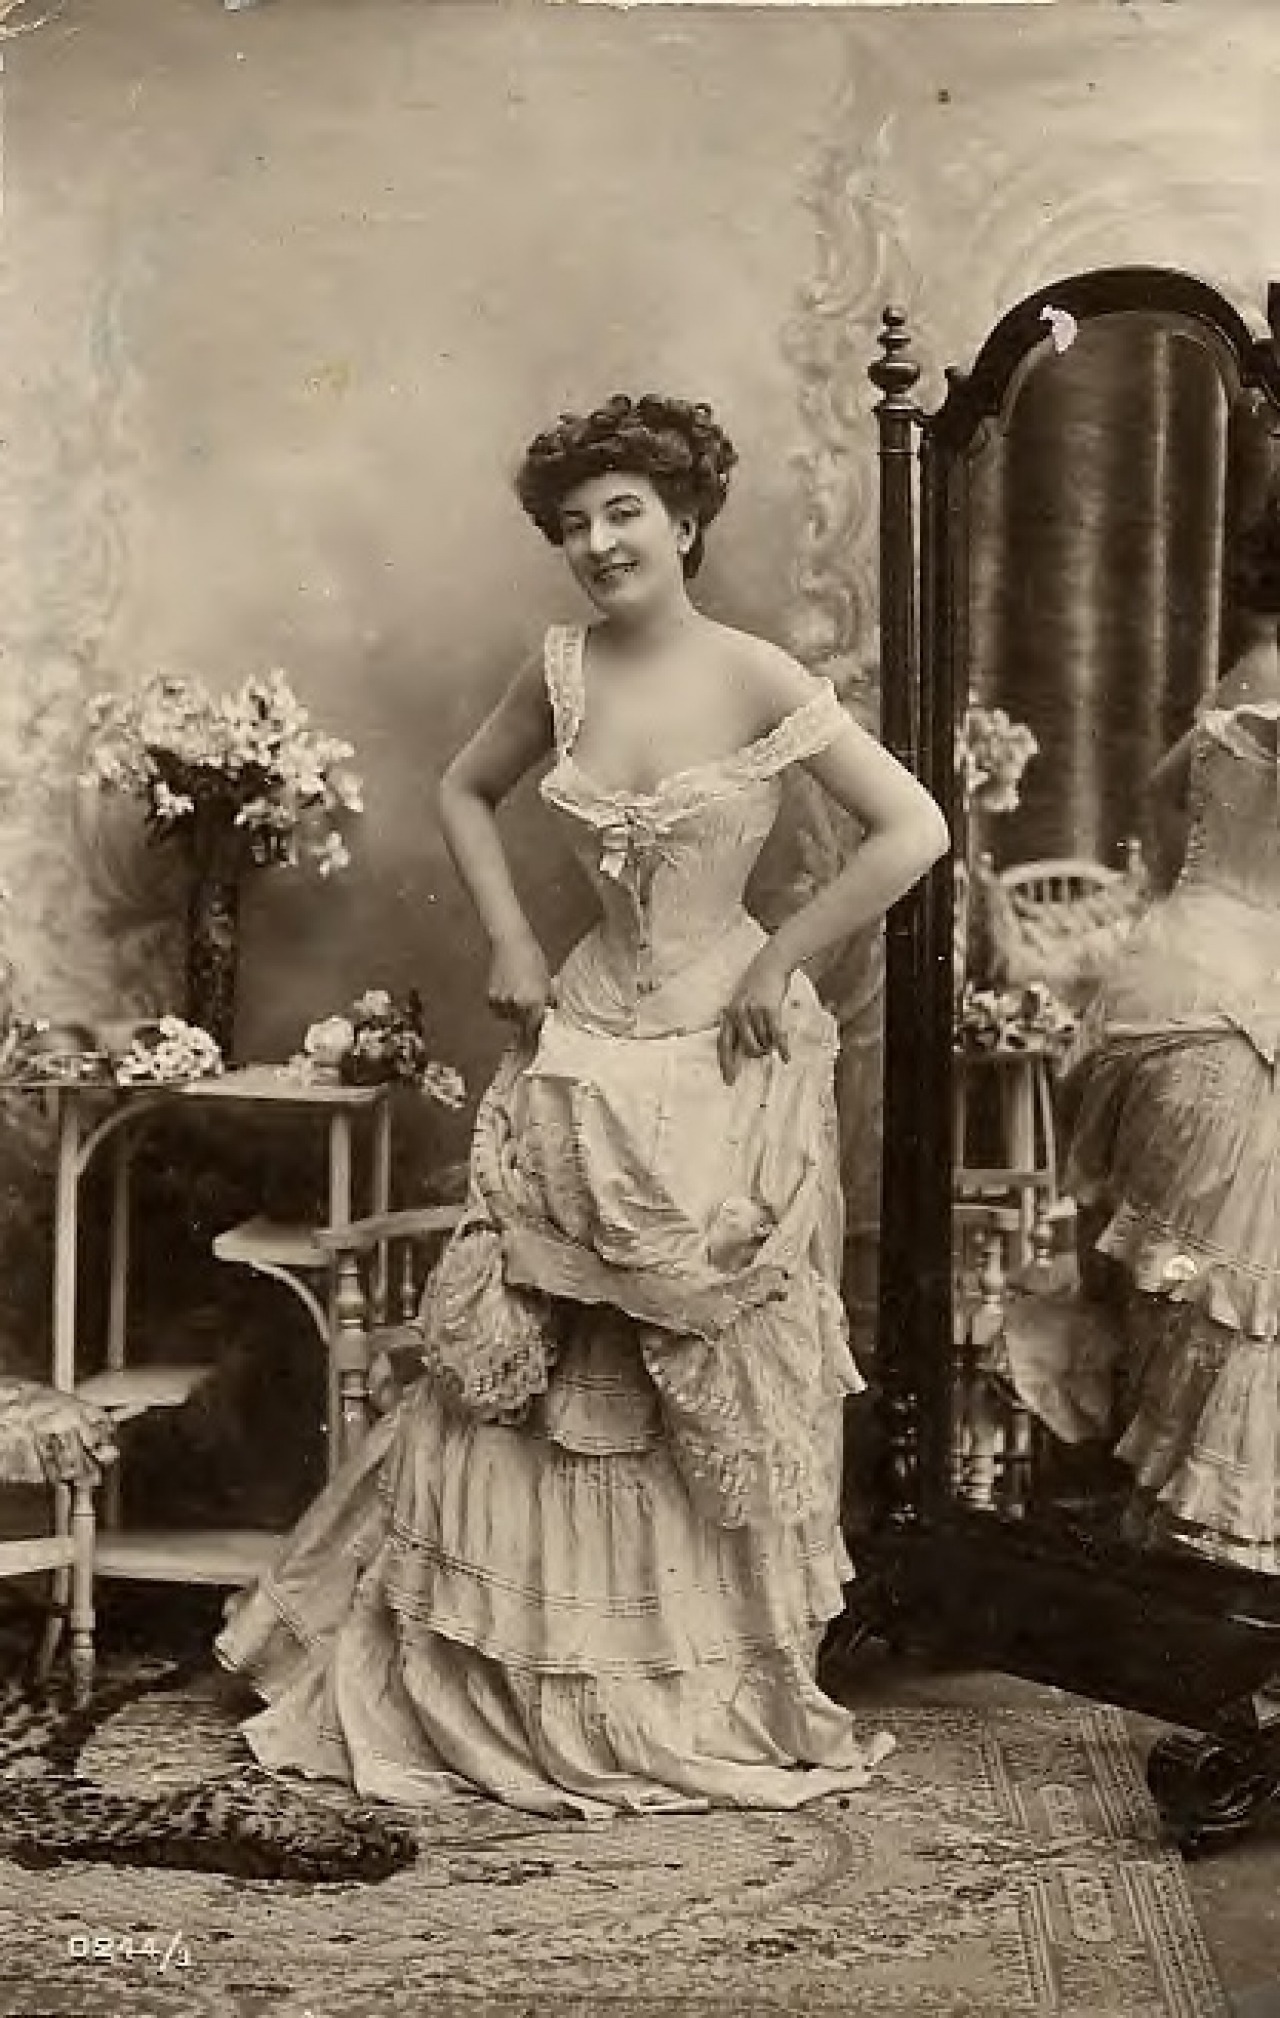 1890s woman dressing  Fashion and Decor: A Cultural History